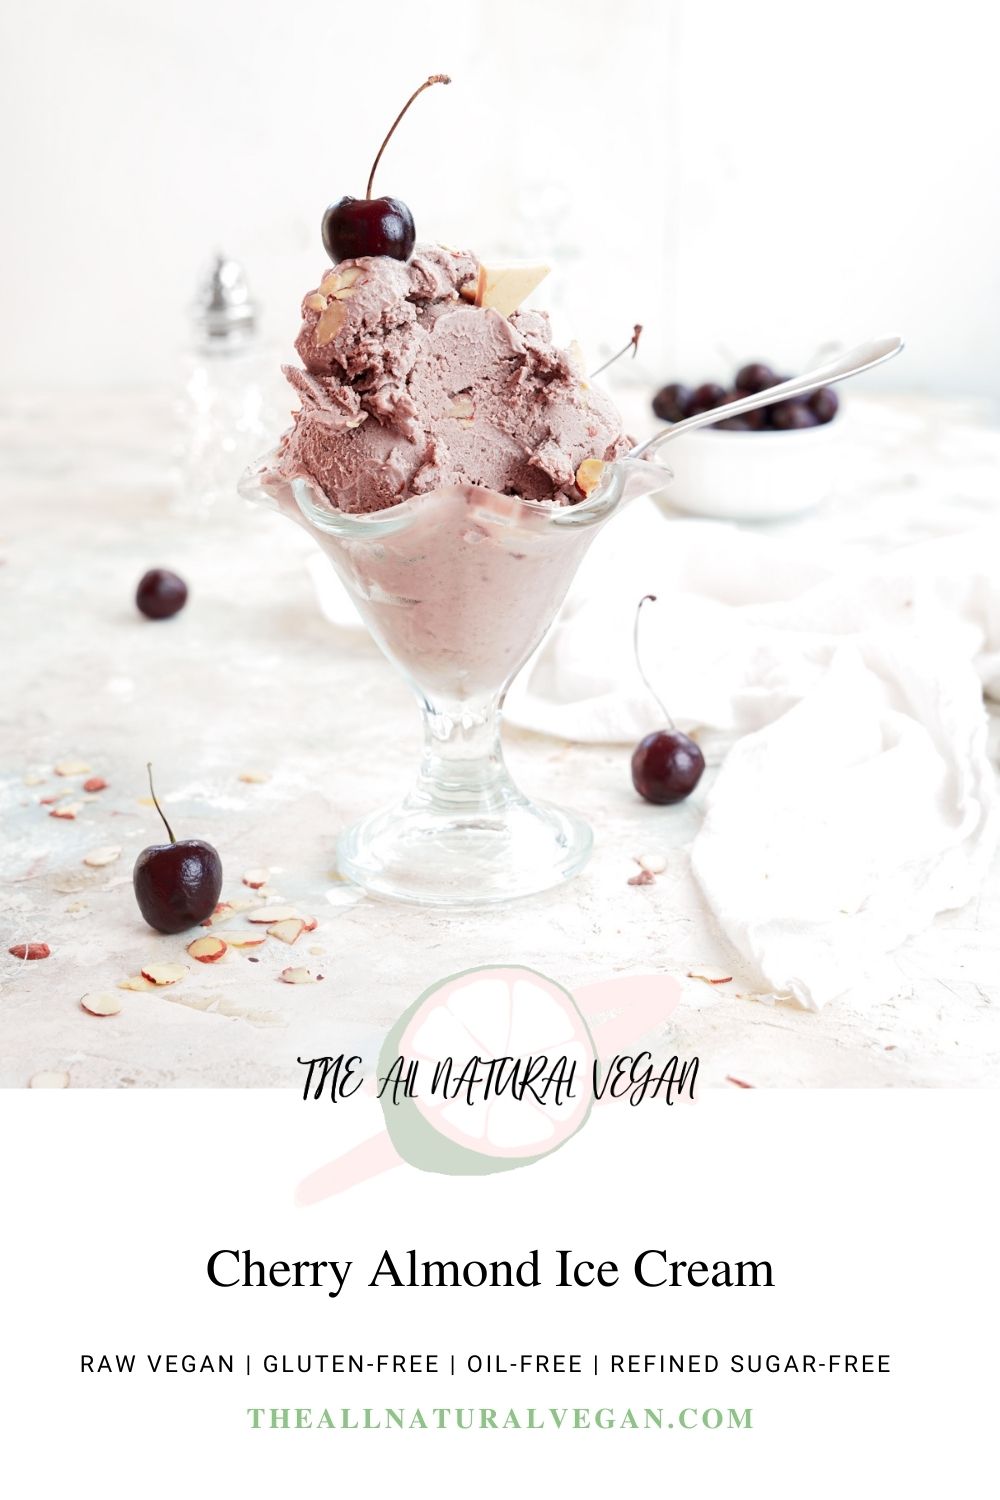 cherry and almond ice cream recipe card stating this is a raw vegan ice cream recipe that is oil-free, gluten-free, and refined sugar-free.